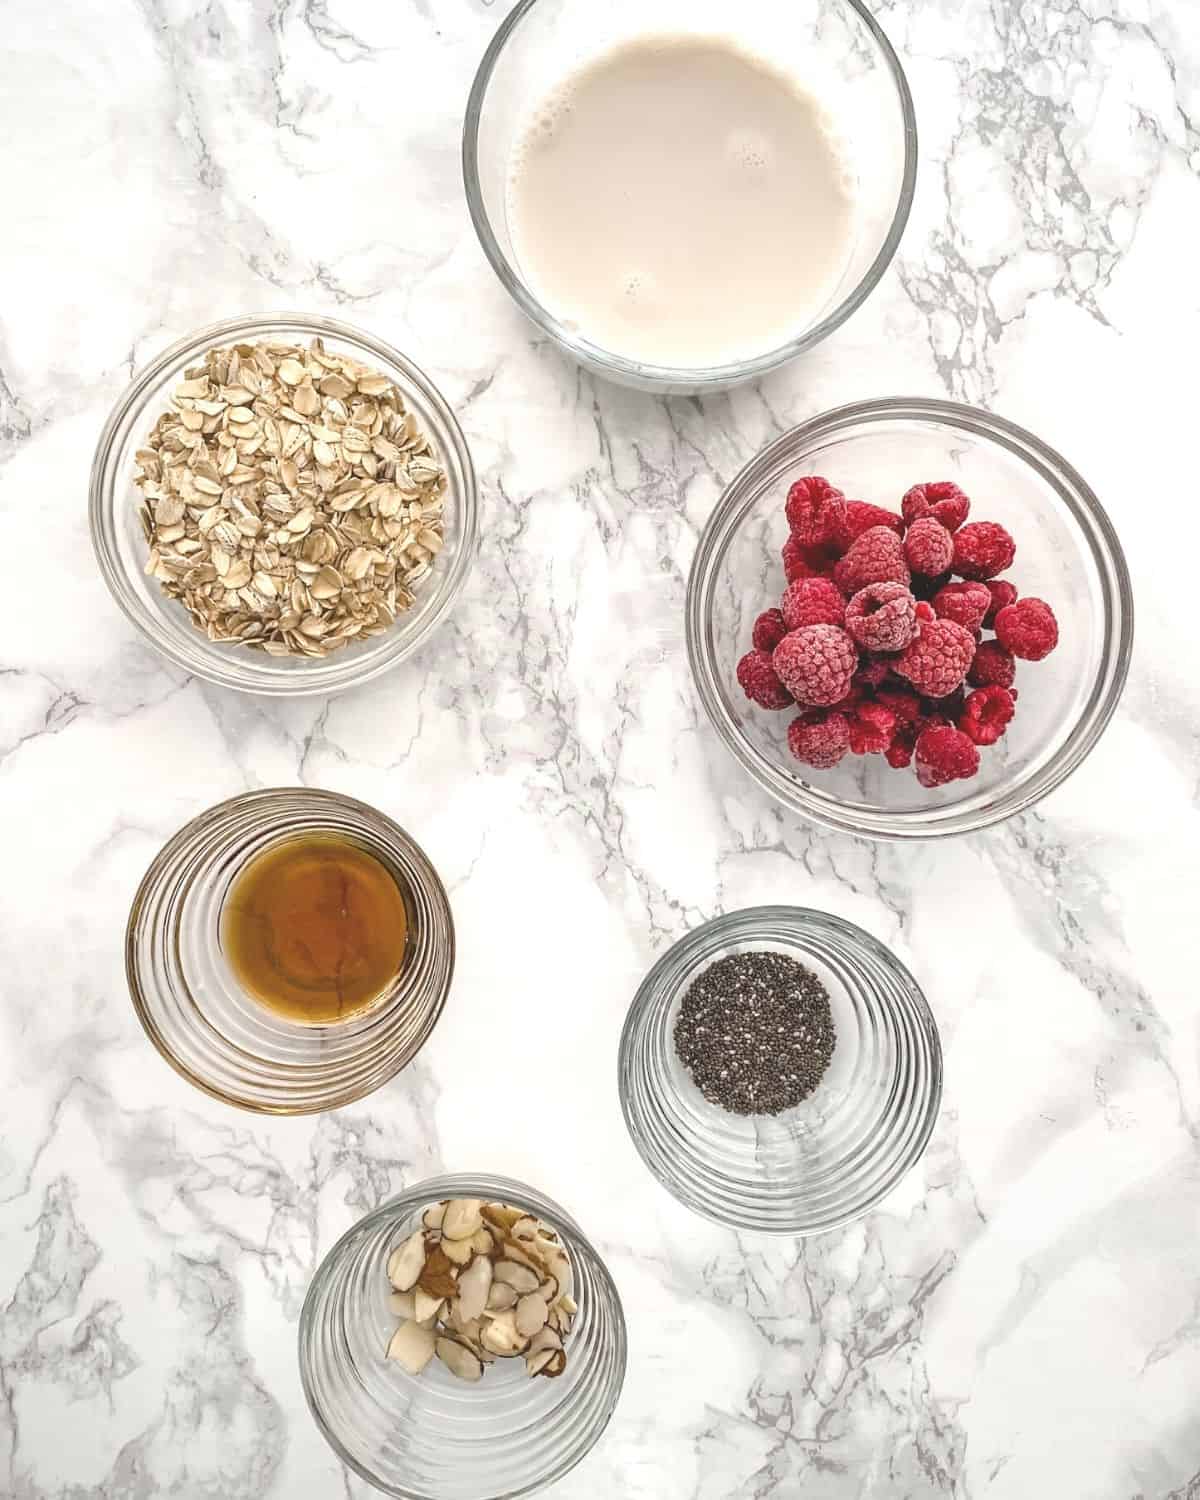 Ingredients for Making Overnight Oats